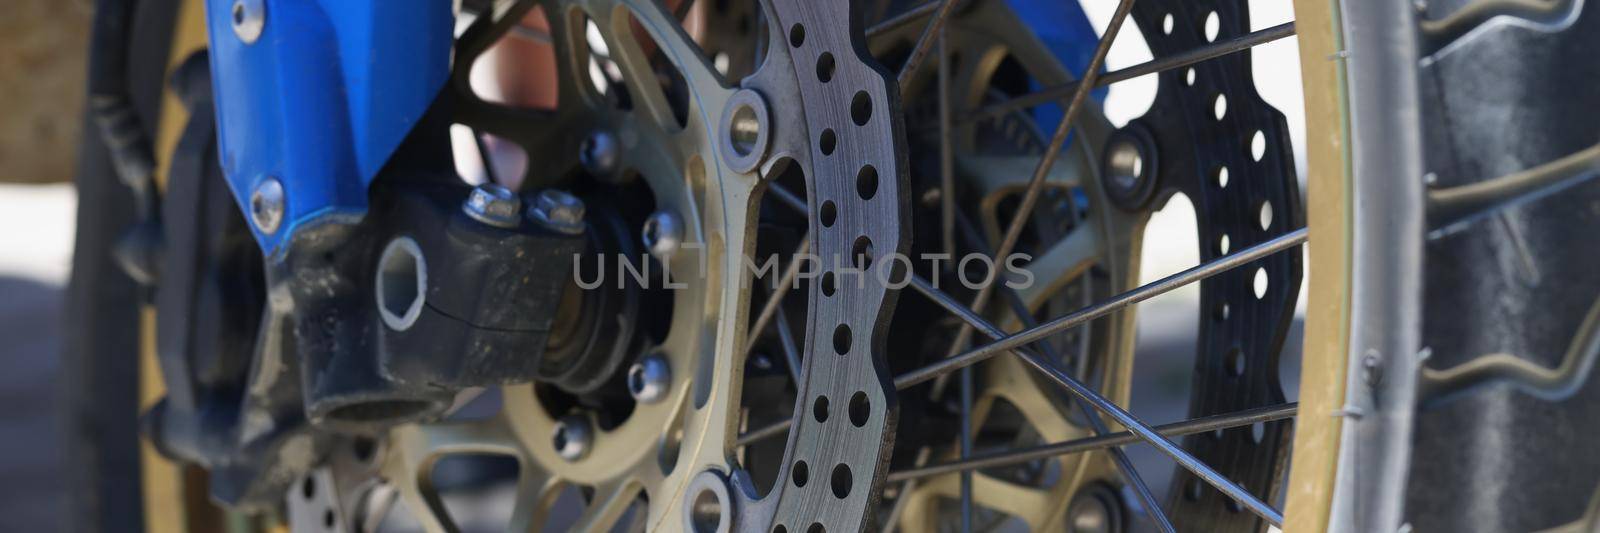 Close-up of metal parts of bike-chain, switch and rear cassette, brakes or gear levers. A sprocket on bicycle wheel, bike gearbox and black electric motor